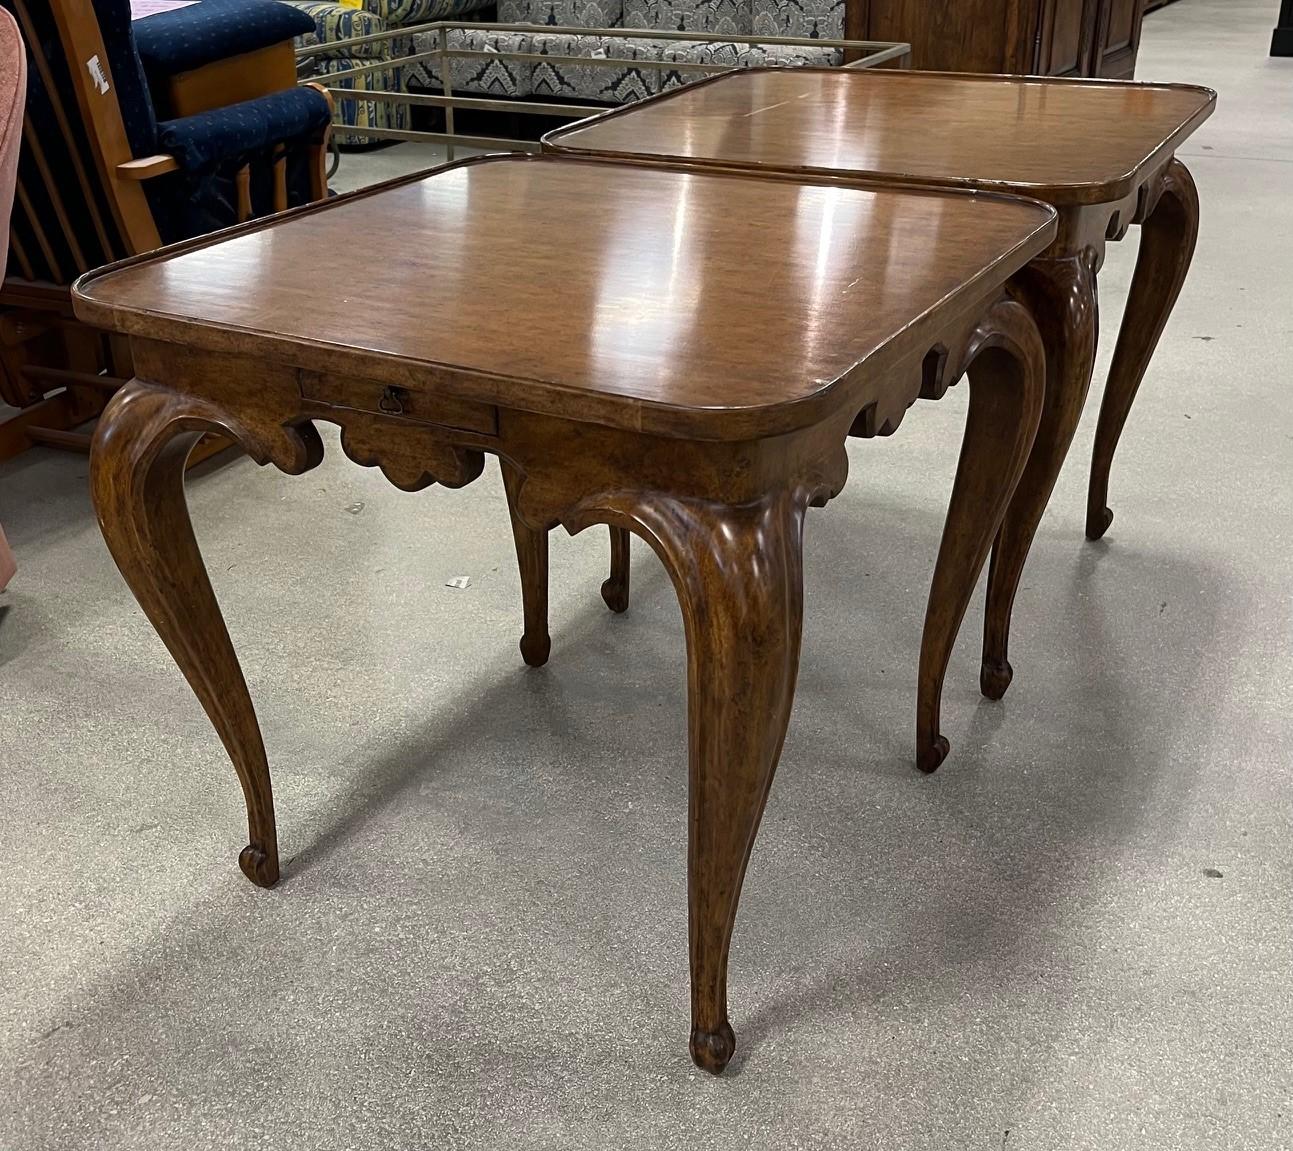 Pair of Vintage Minton Spidell Louis XV Style Carved Walnut Tables

Crafted by Minton Spidell at the end of the 20th century, these beautiful square tables stand on elegant cabriole legs over scroll feet. The tables feature scalloped aprons and a